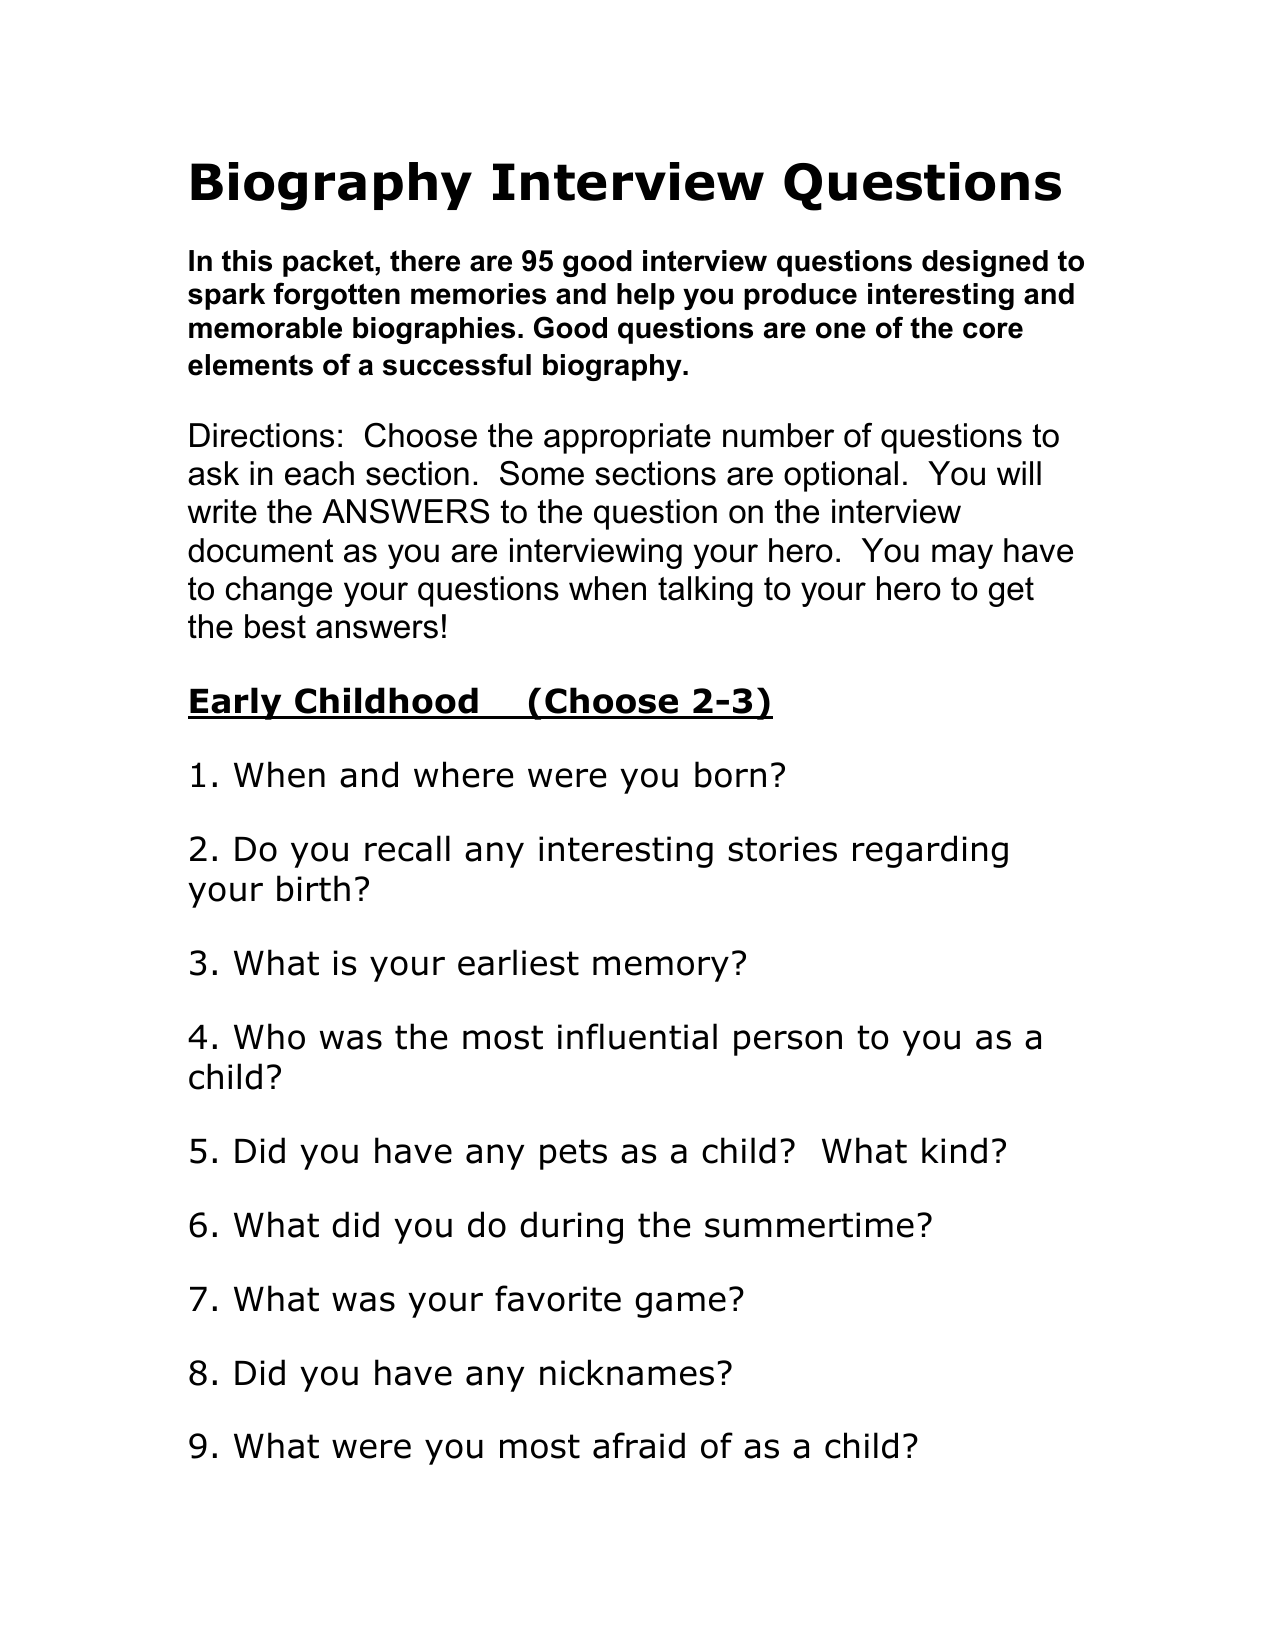 Questions to ask someone to write a biography - Questions to ask ...